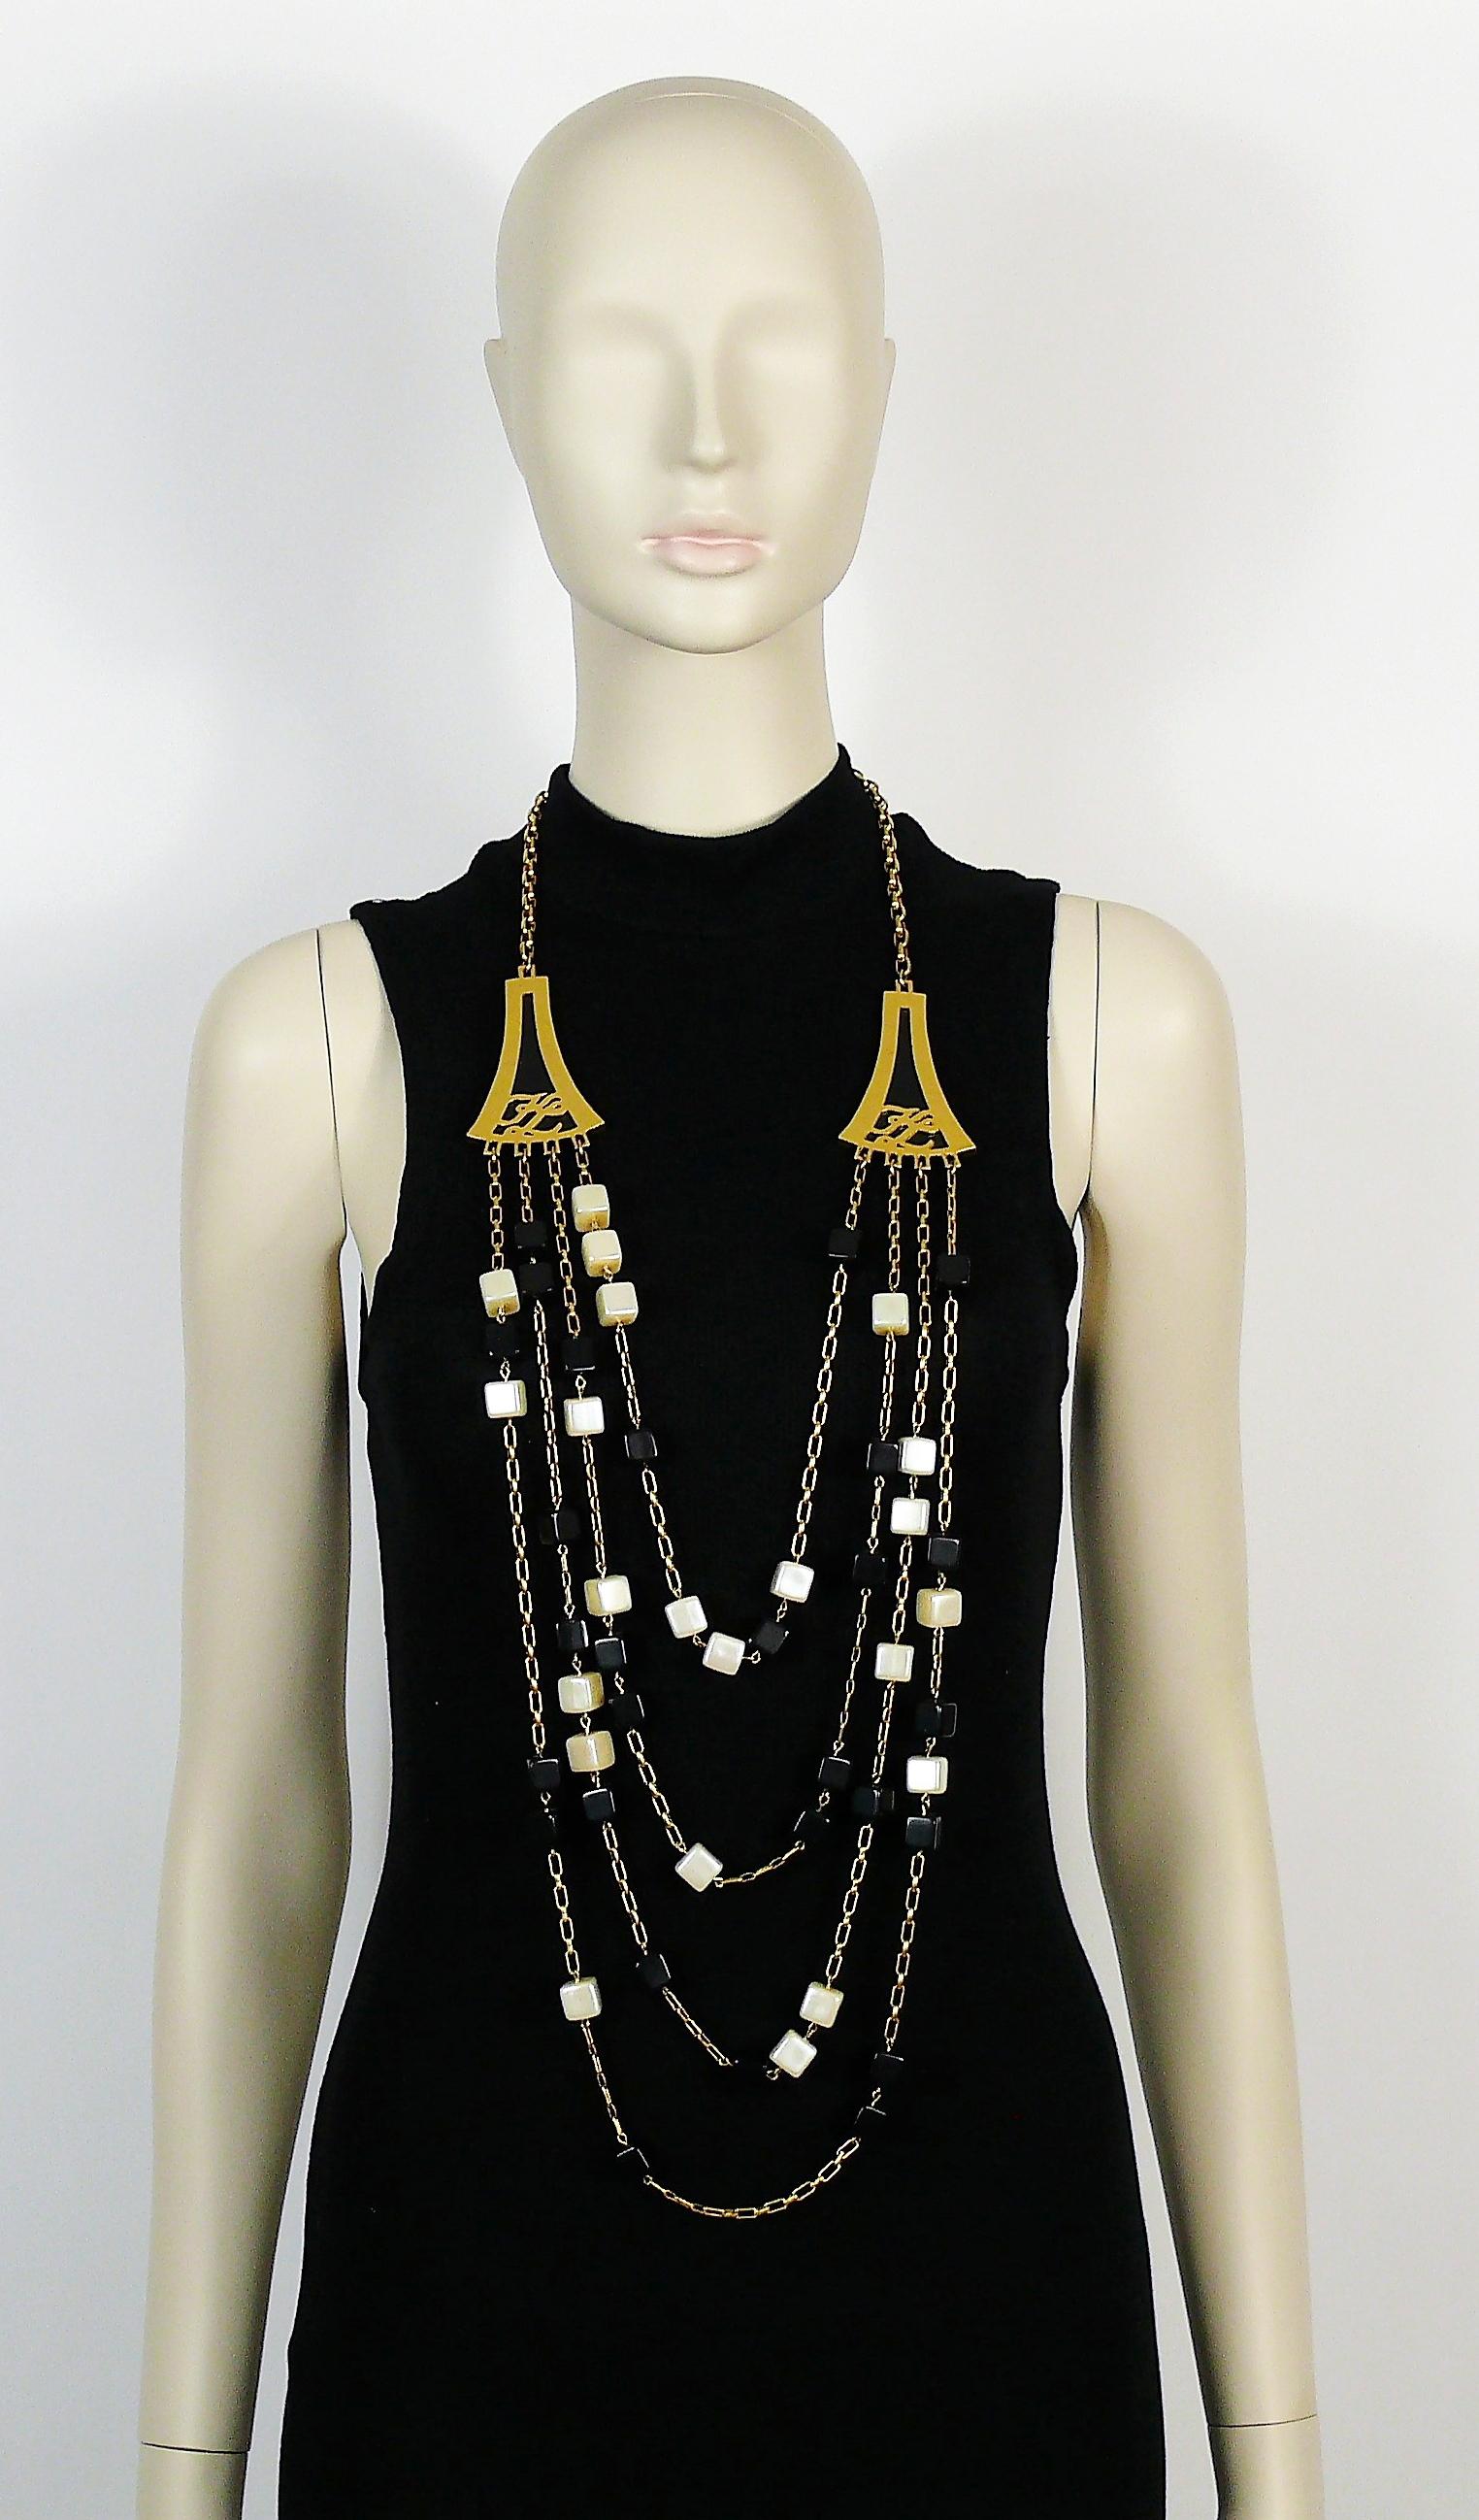 KARL LAGERFELD vintage four strand gold toned sautoir necklace featuring black/iridescent off-white resin cubes, gold toned chains and 2 large KL monogram elements embellished with black perspex on both sides.

Adjustable lobster clasp closure.

KL